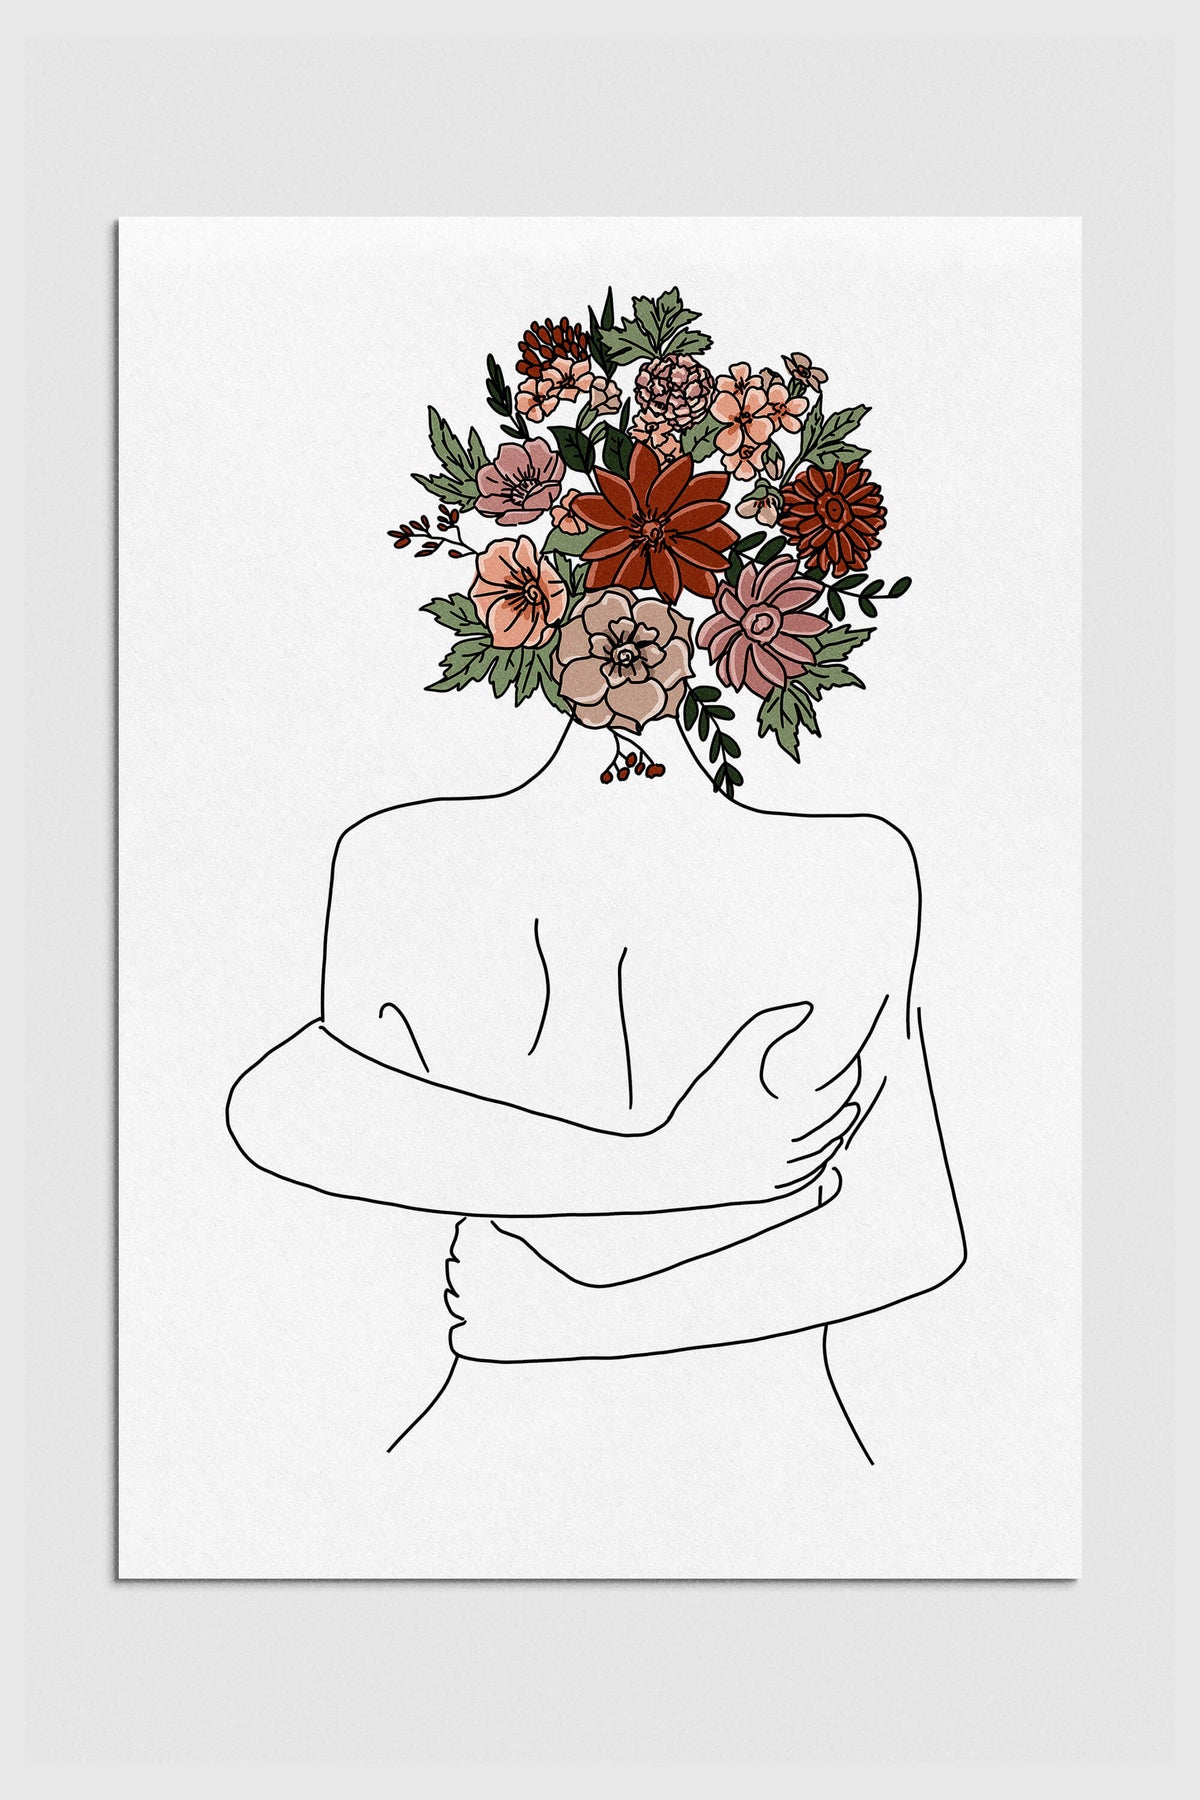 A captivating line art print featuring a romantic couple surrounded by abstract floral elements. The minimalist style and unique flower-headed figures evoke a sense of love and mystery. Perfect for bedroom wall decor, adding warmth and connection to your space.